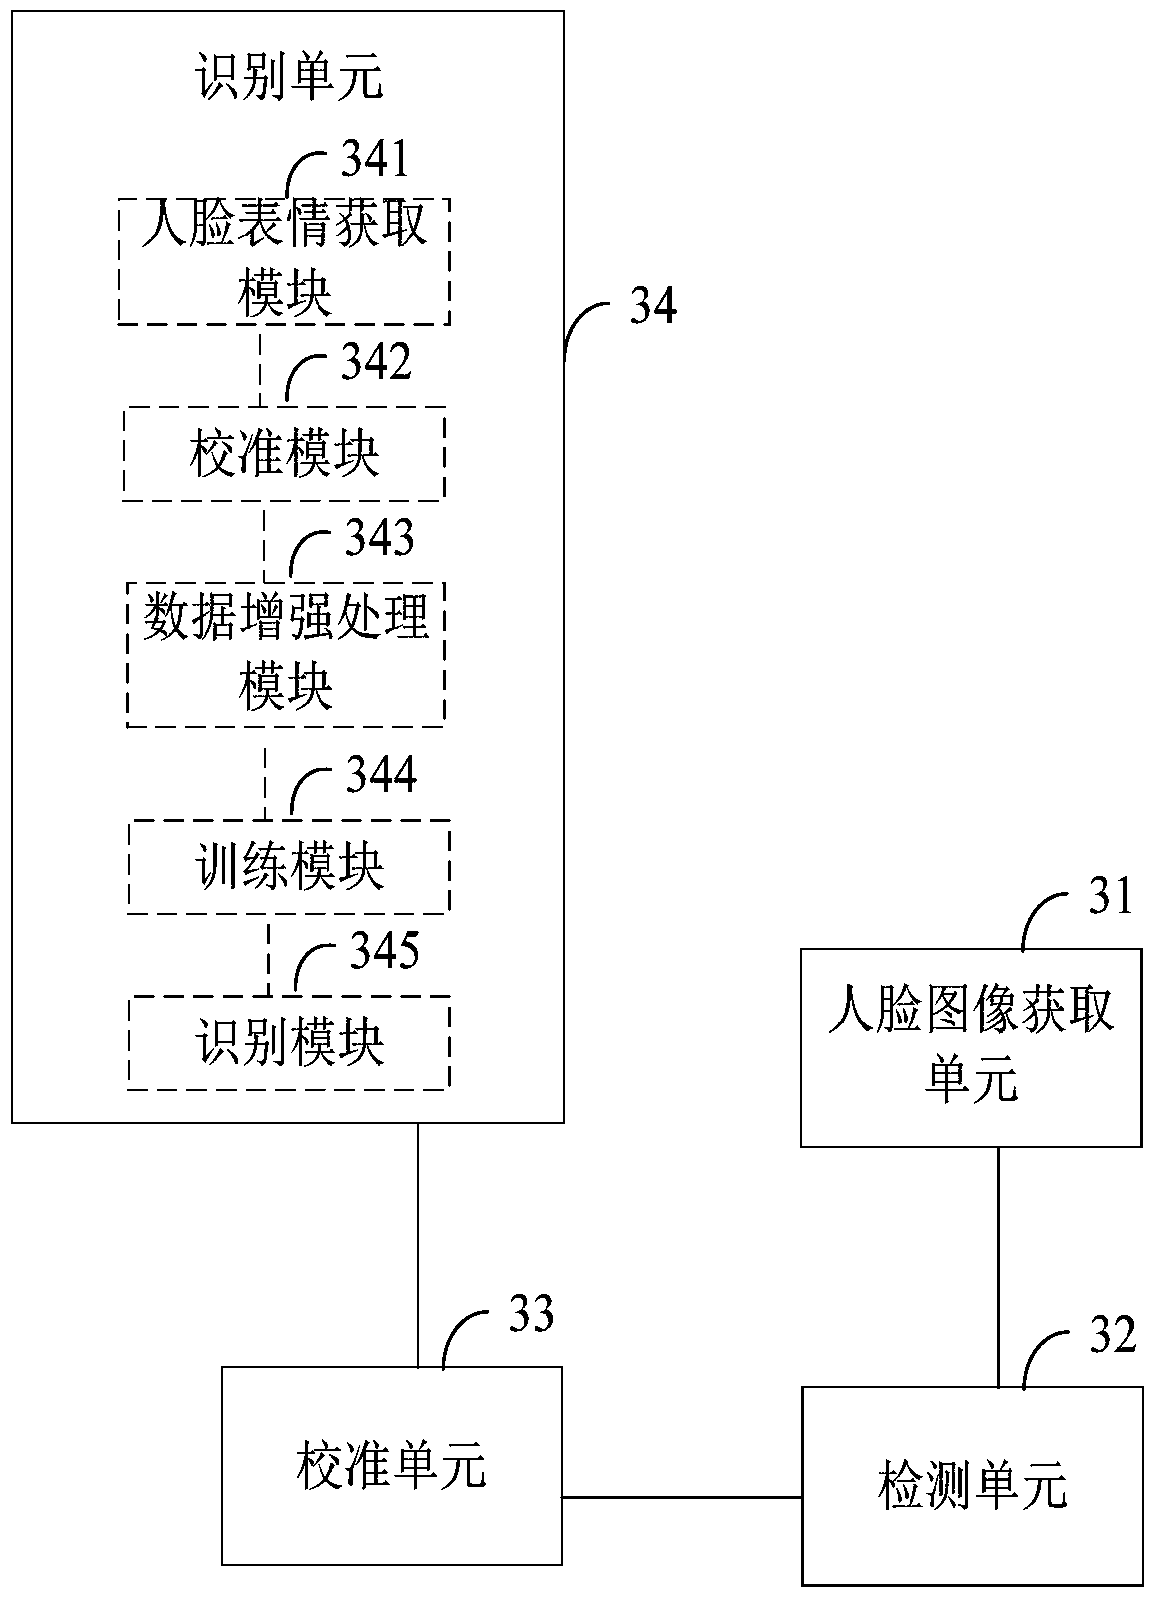 Method and device for facial expression recognition